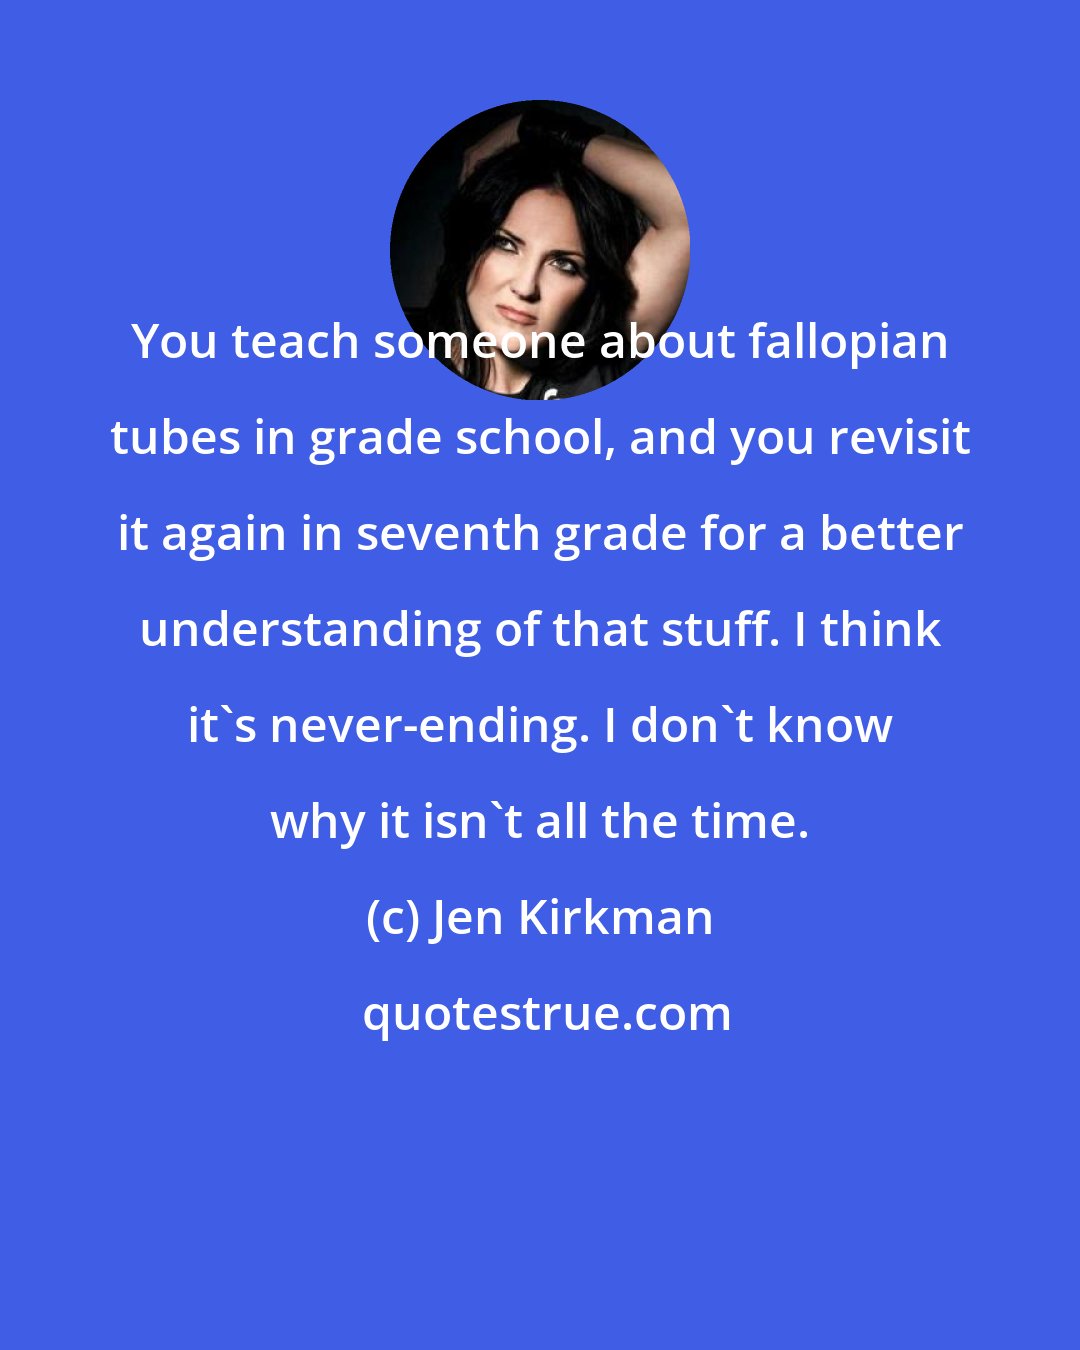 Jen Kirkman: You teach someone about fallopian tubes in grade school, and you revisit it again in seventh grade for a better understanding of that stuff. I think it's never-ending. I don't know why it isn't all the time.